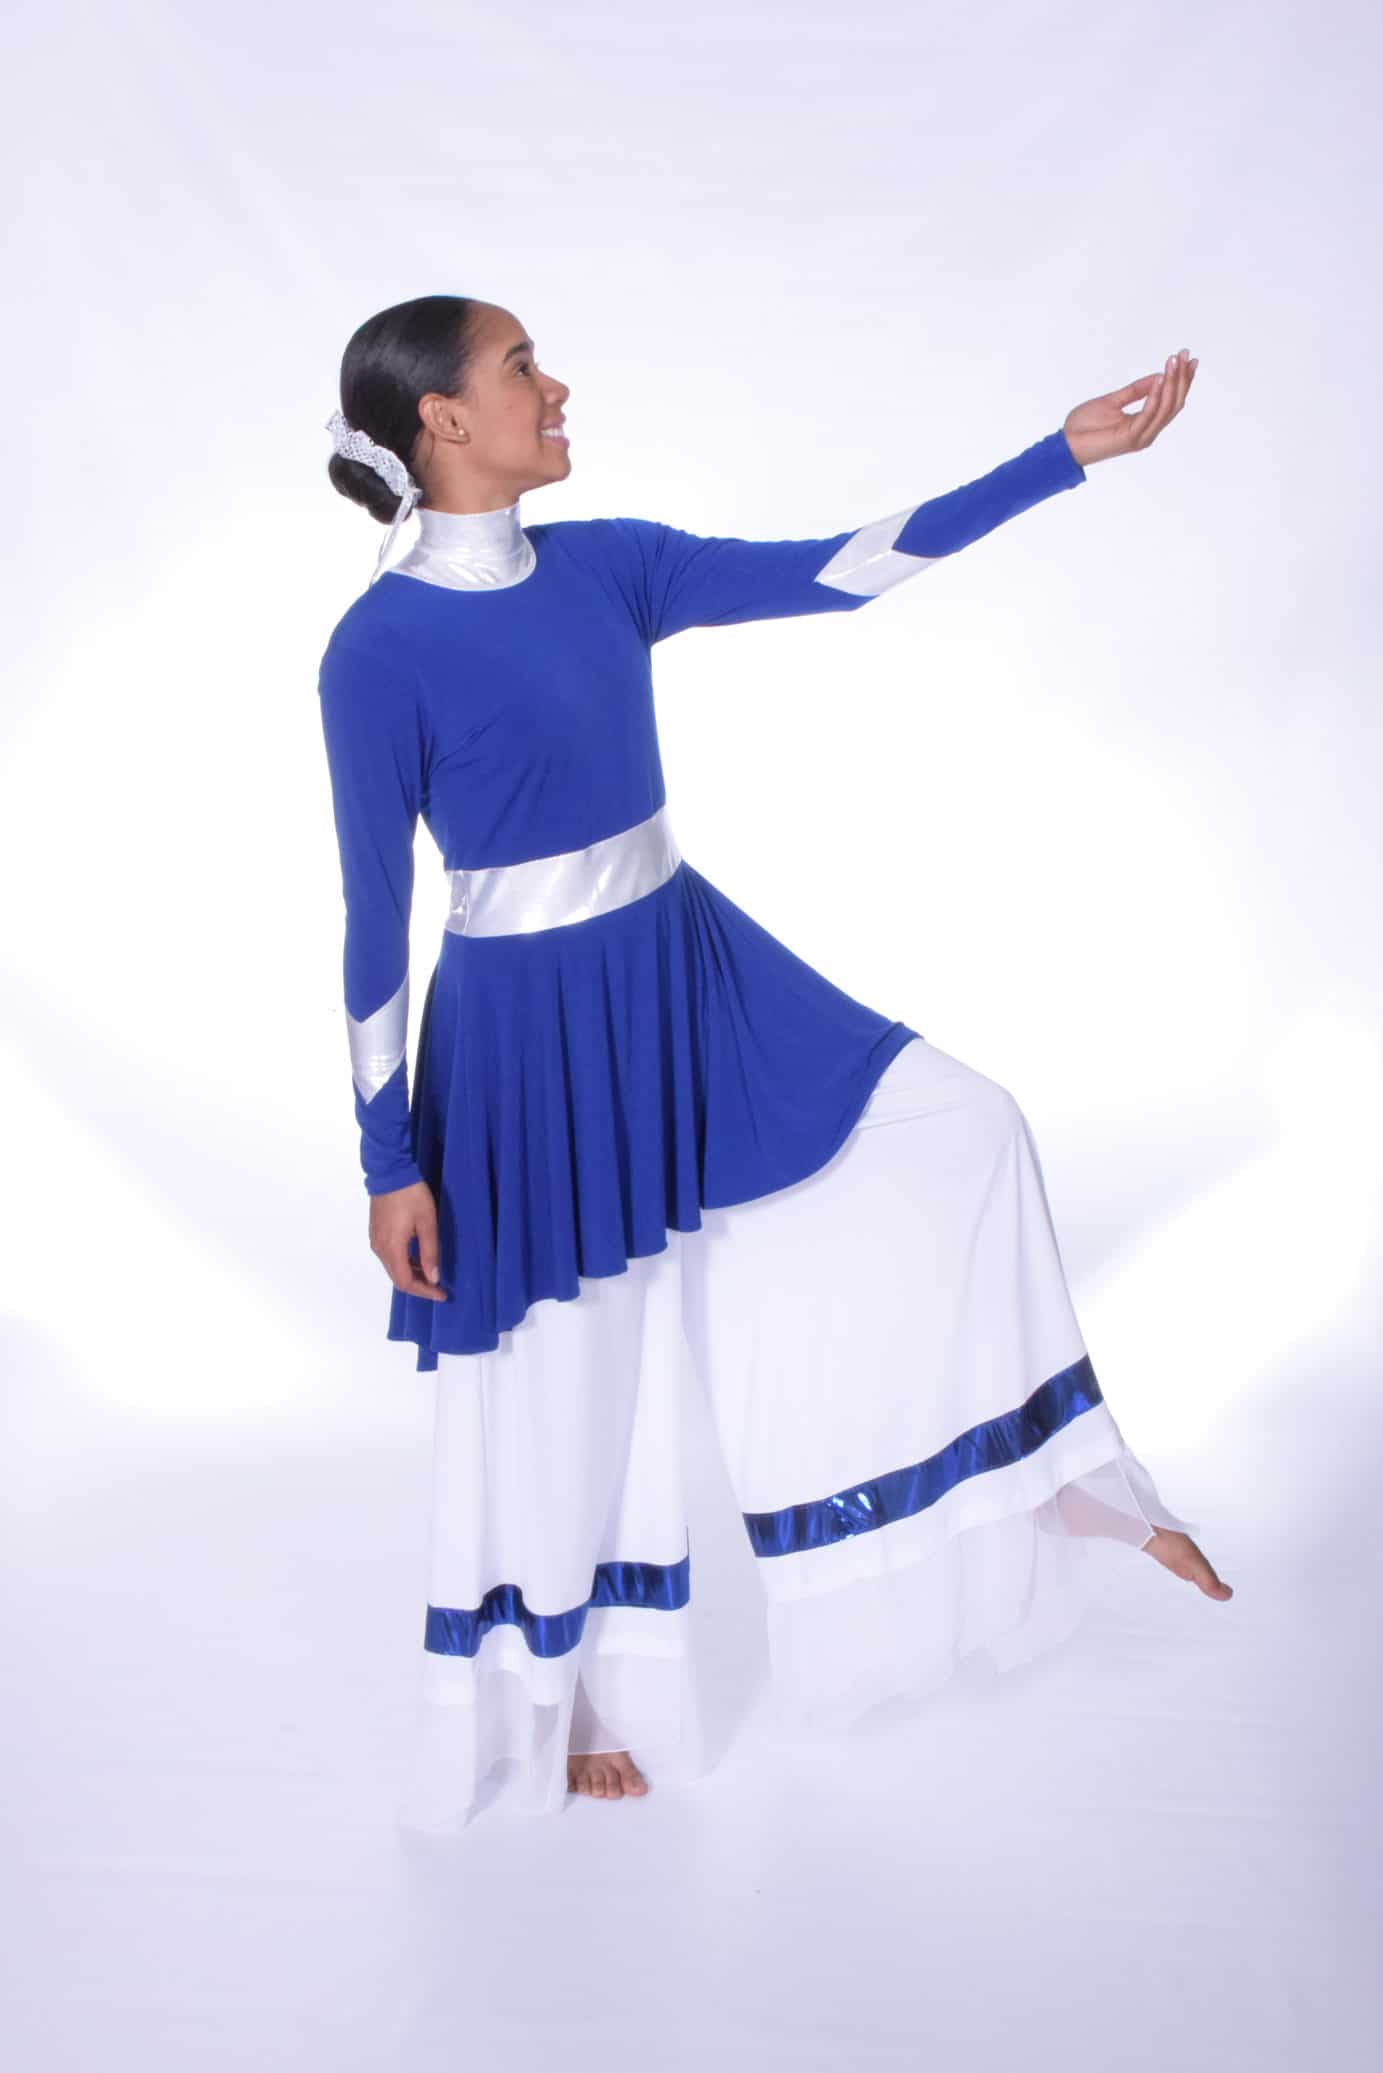 Danzcue Mens Praise Worship Dance Robe with Stand-up Collar 